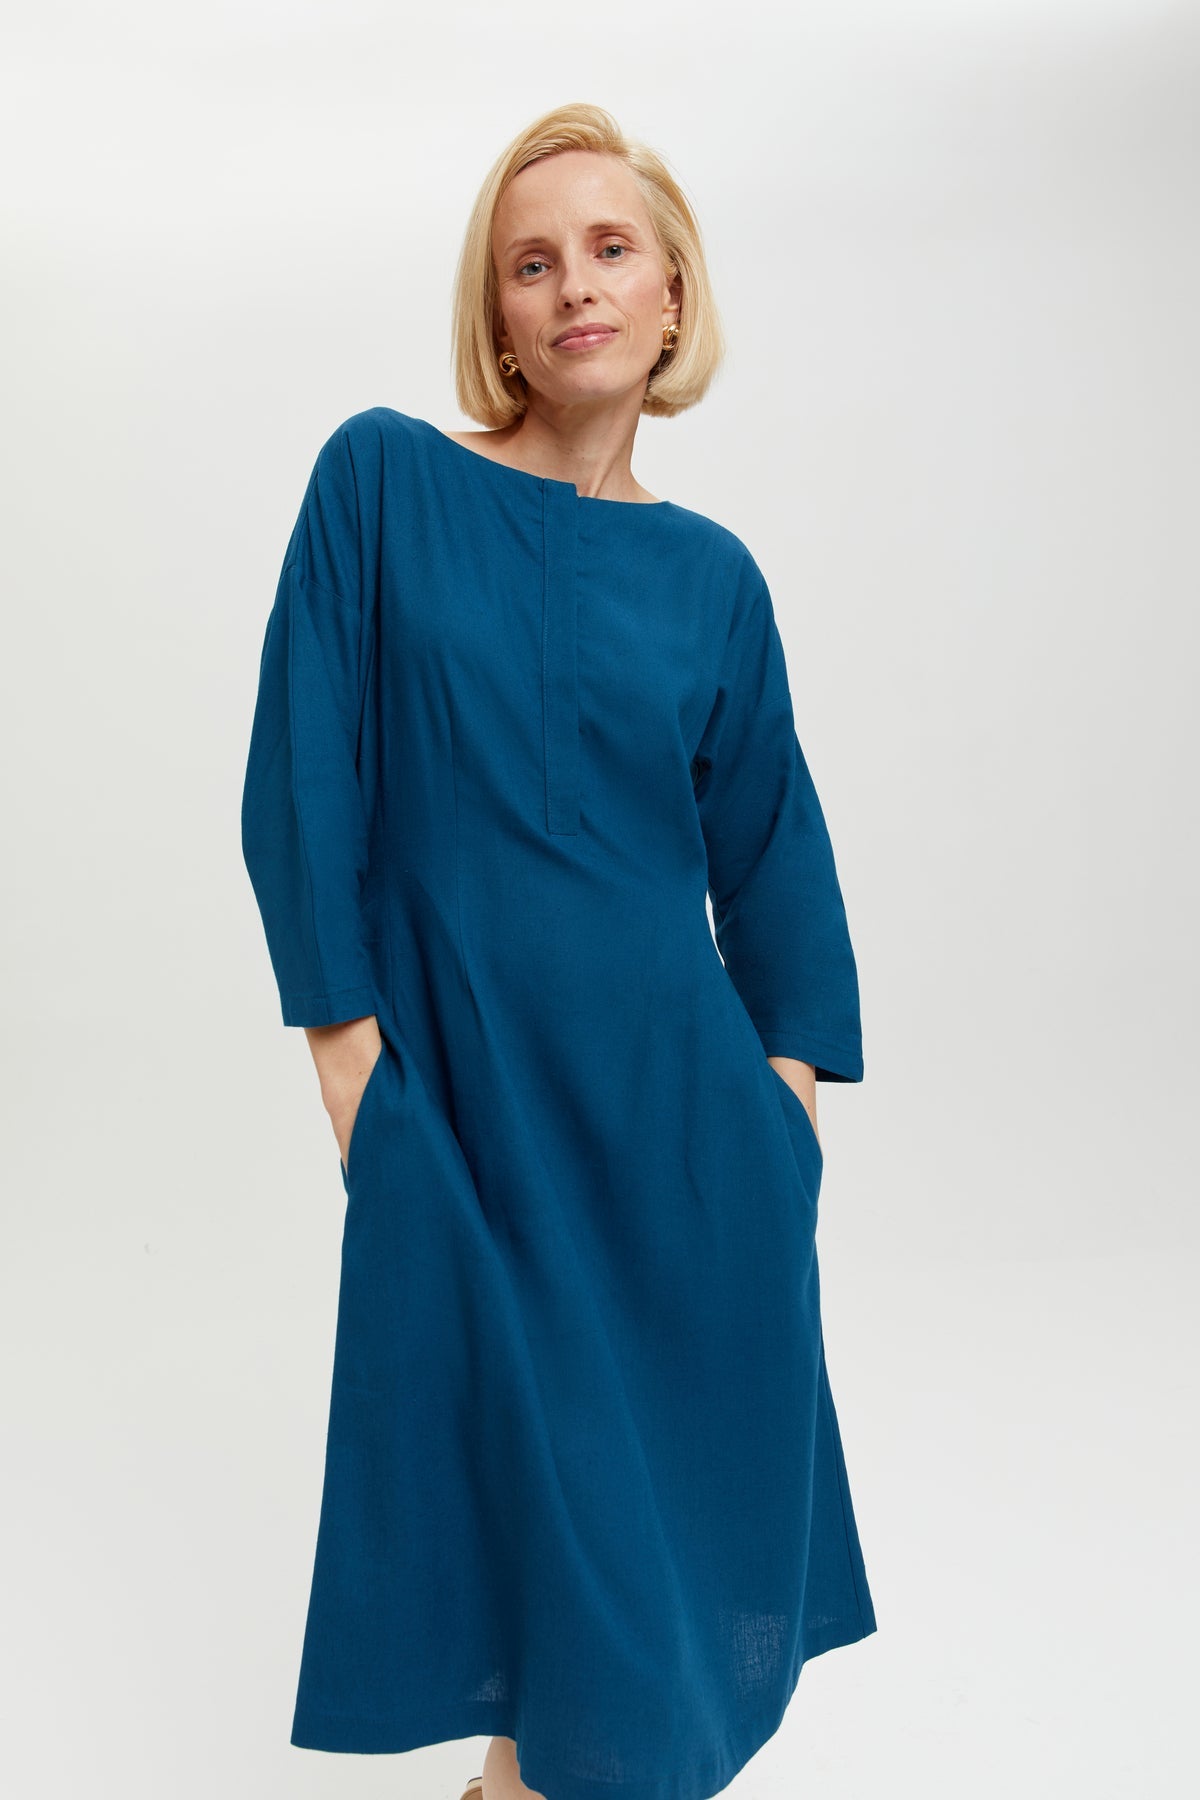 Lusin | Midi linen dress with button placket in petrol blue by Ayani